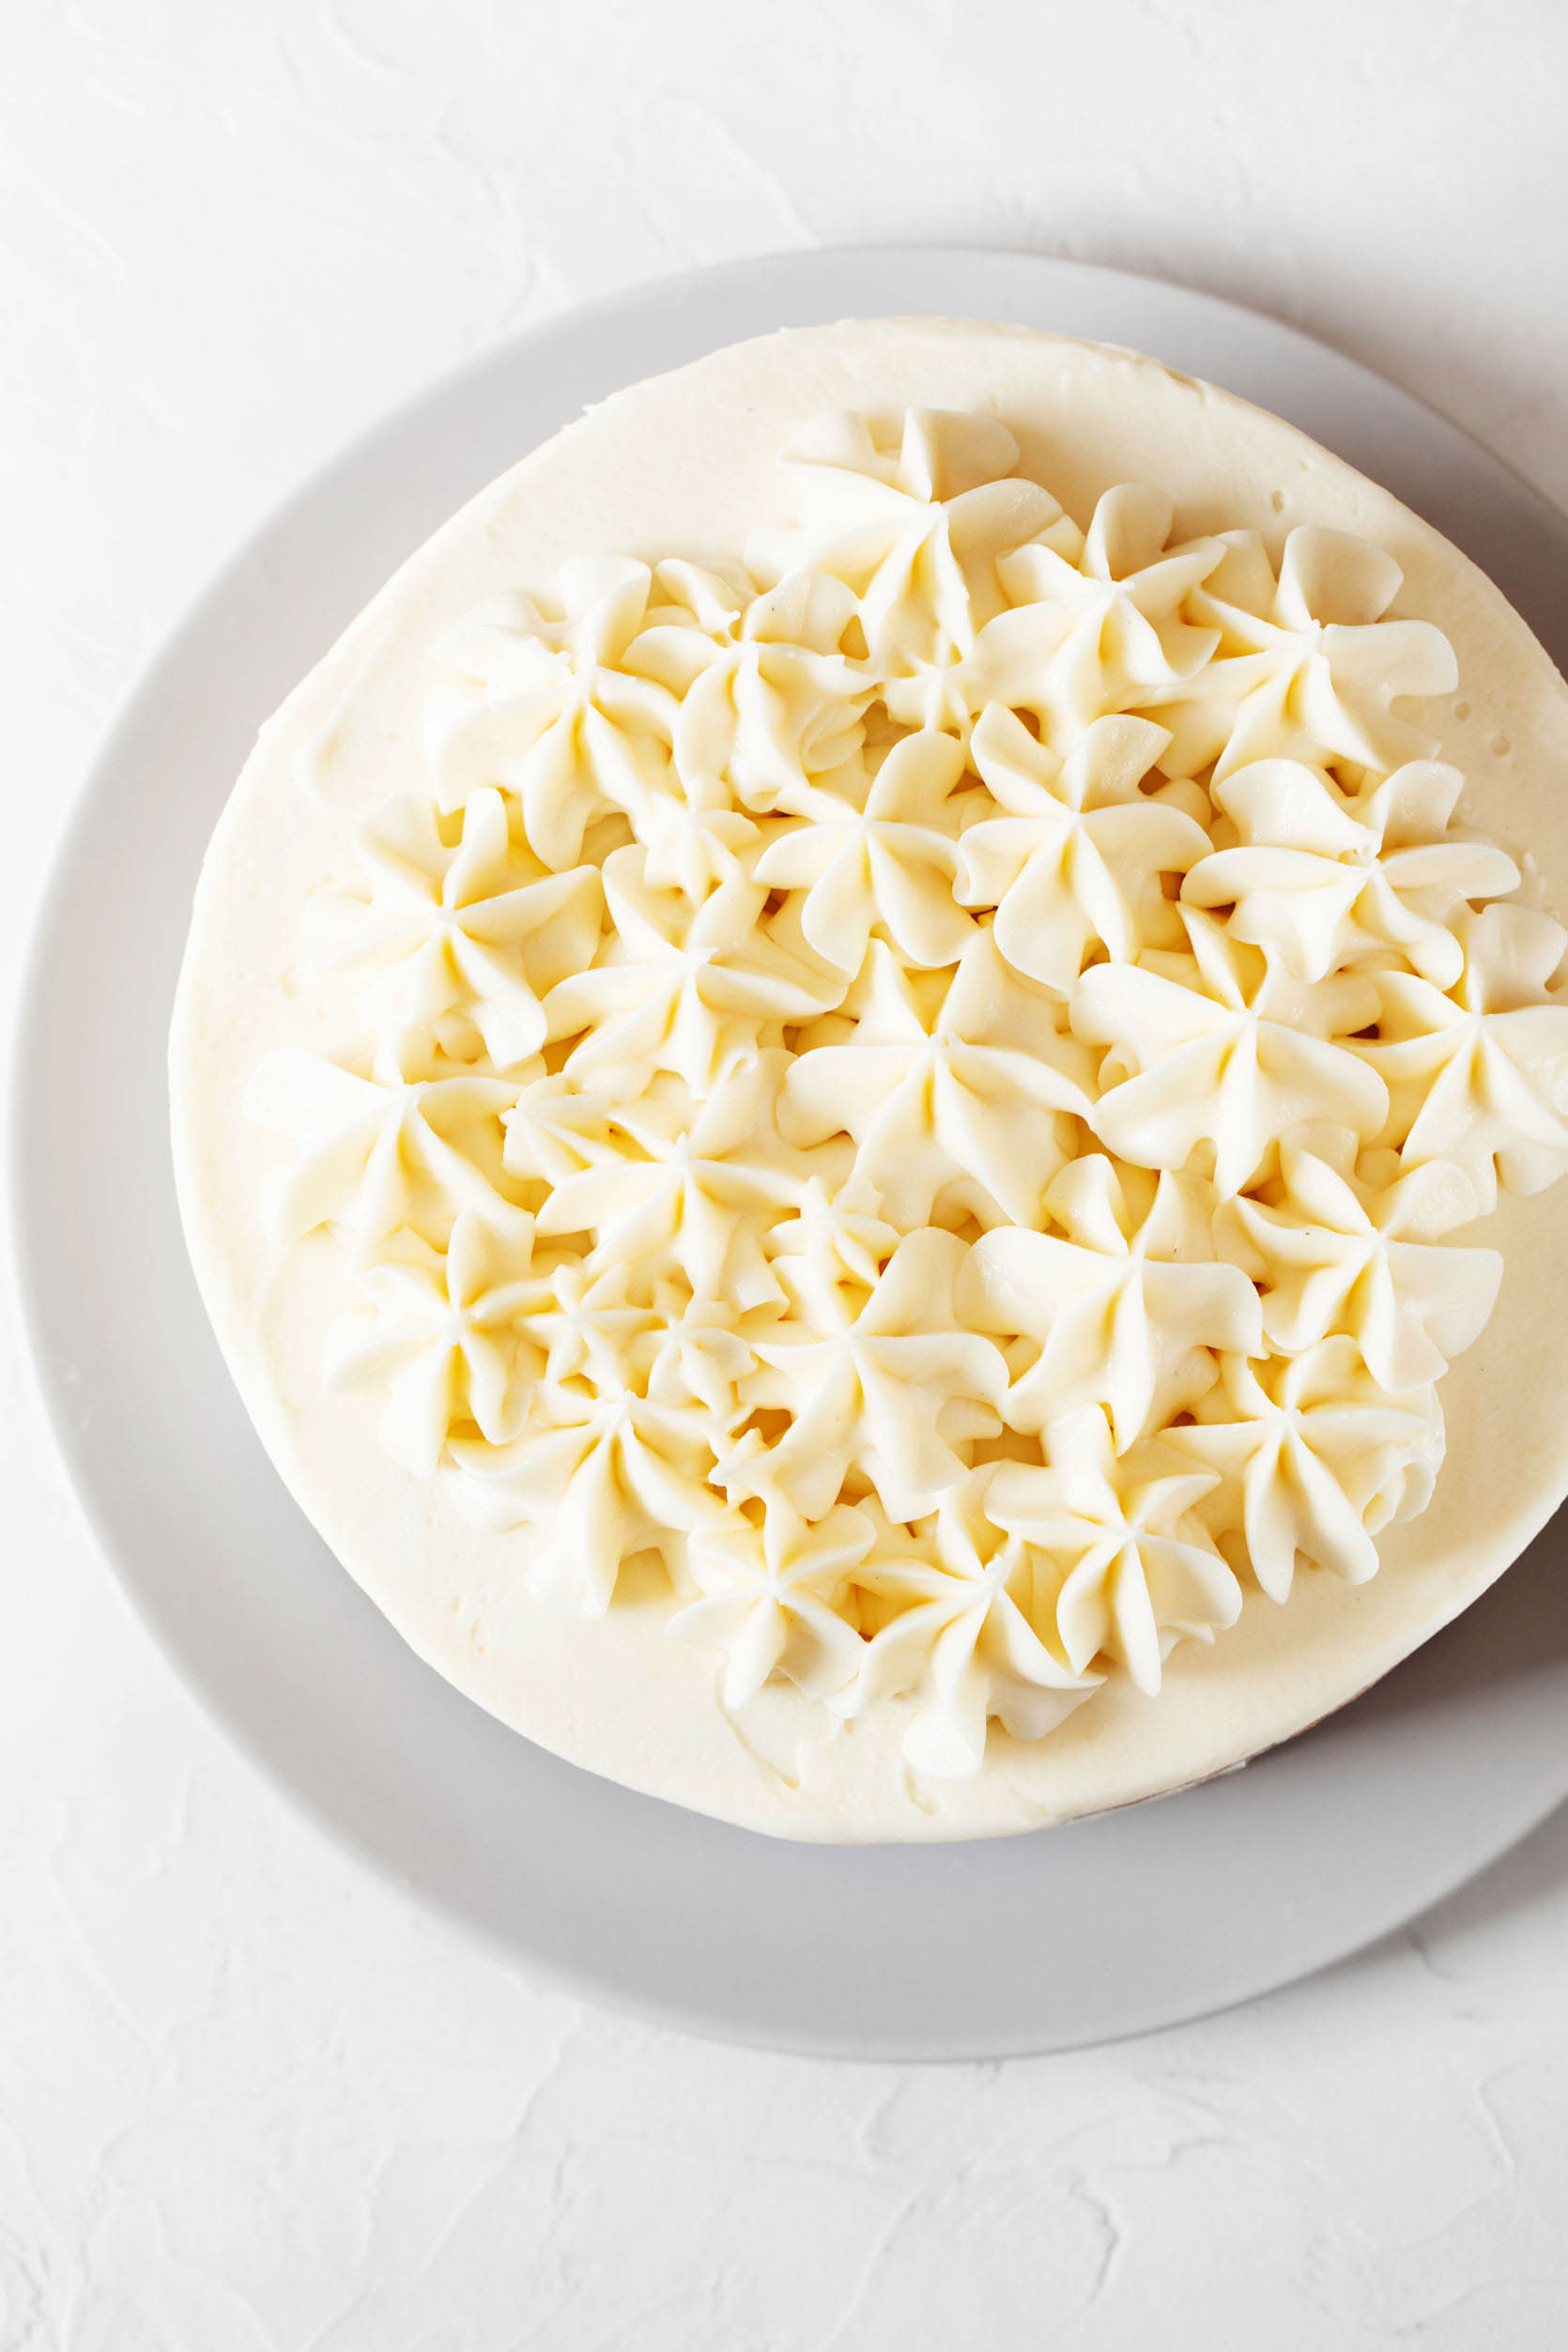 The top of a frosted, round white cake. It has been decorated with star shapes of buttercream frosting.